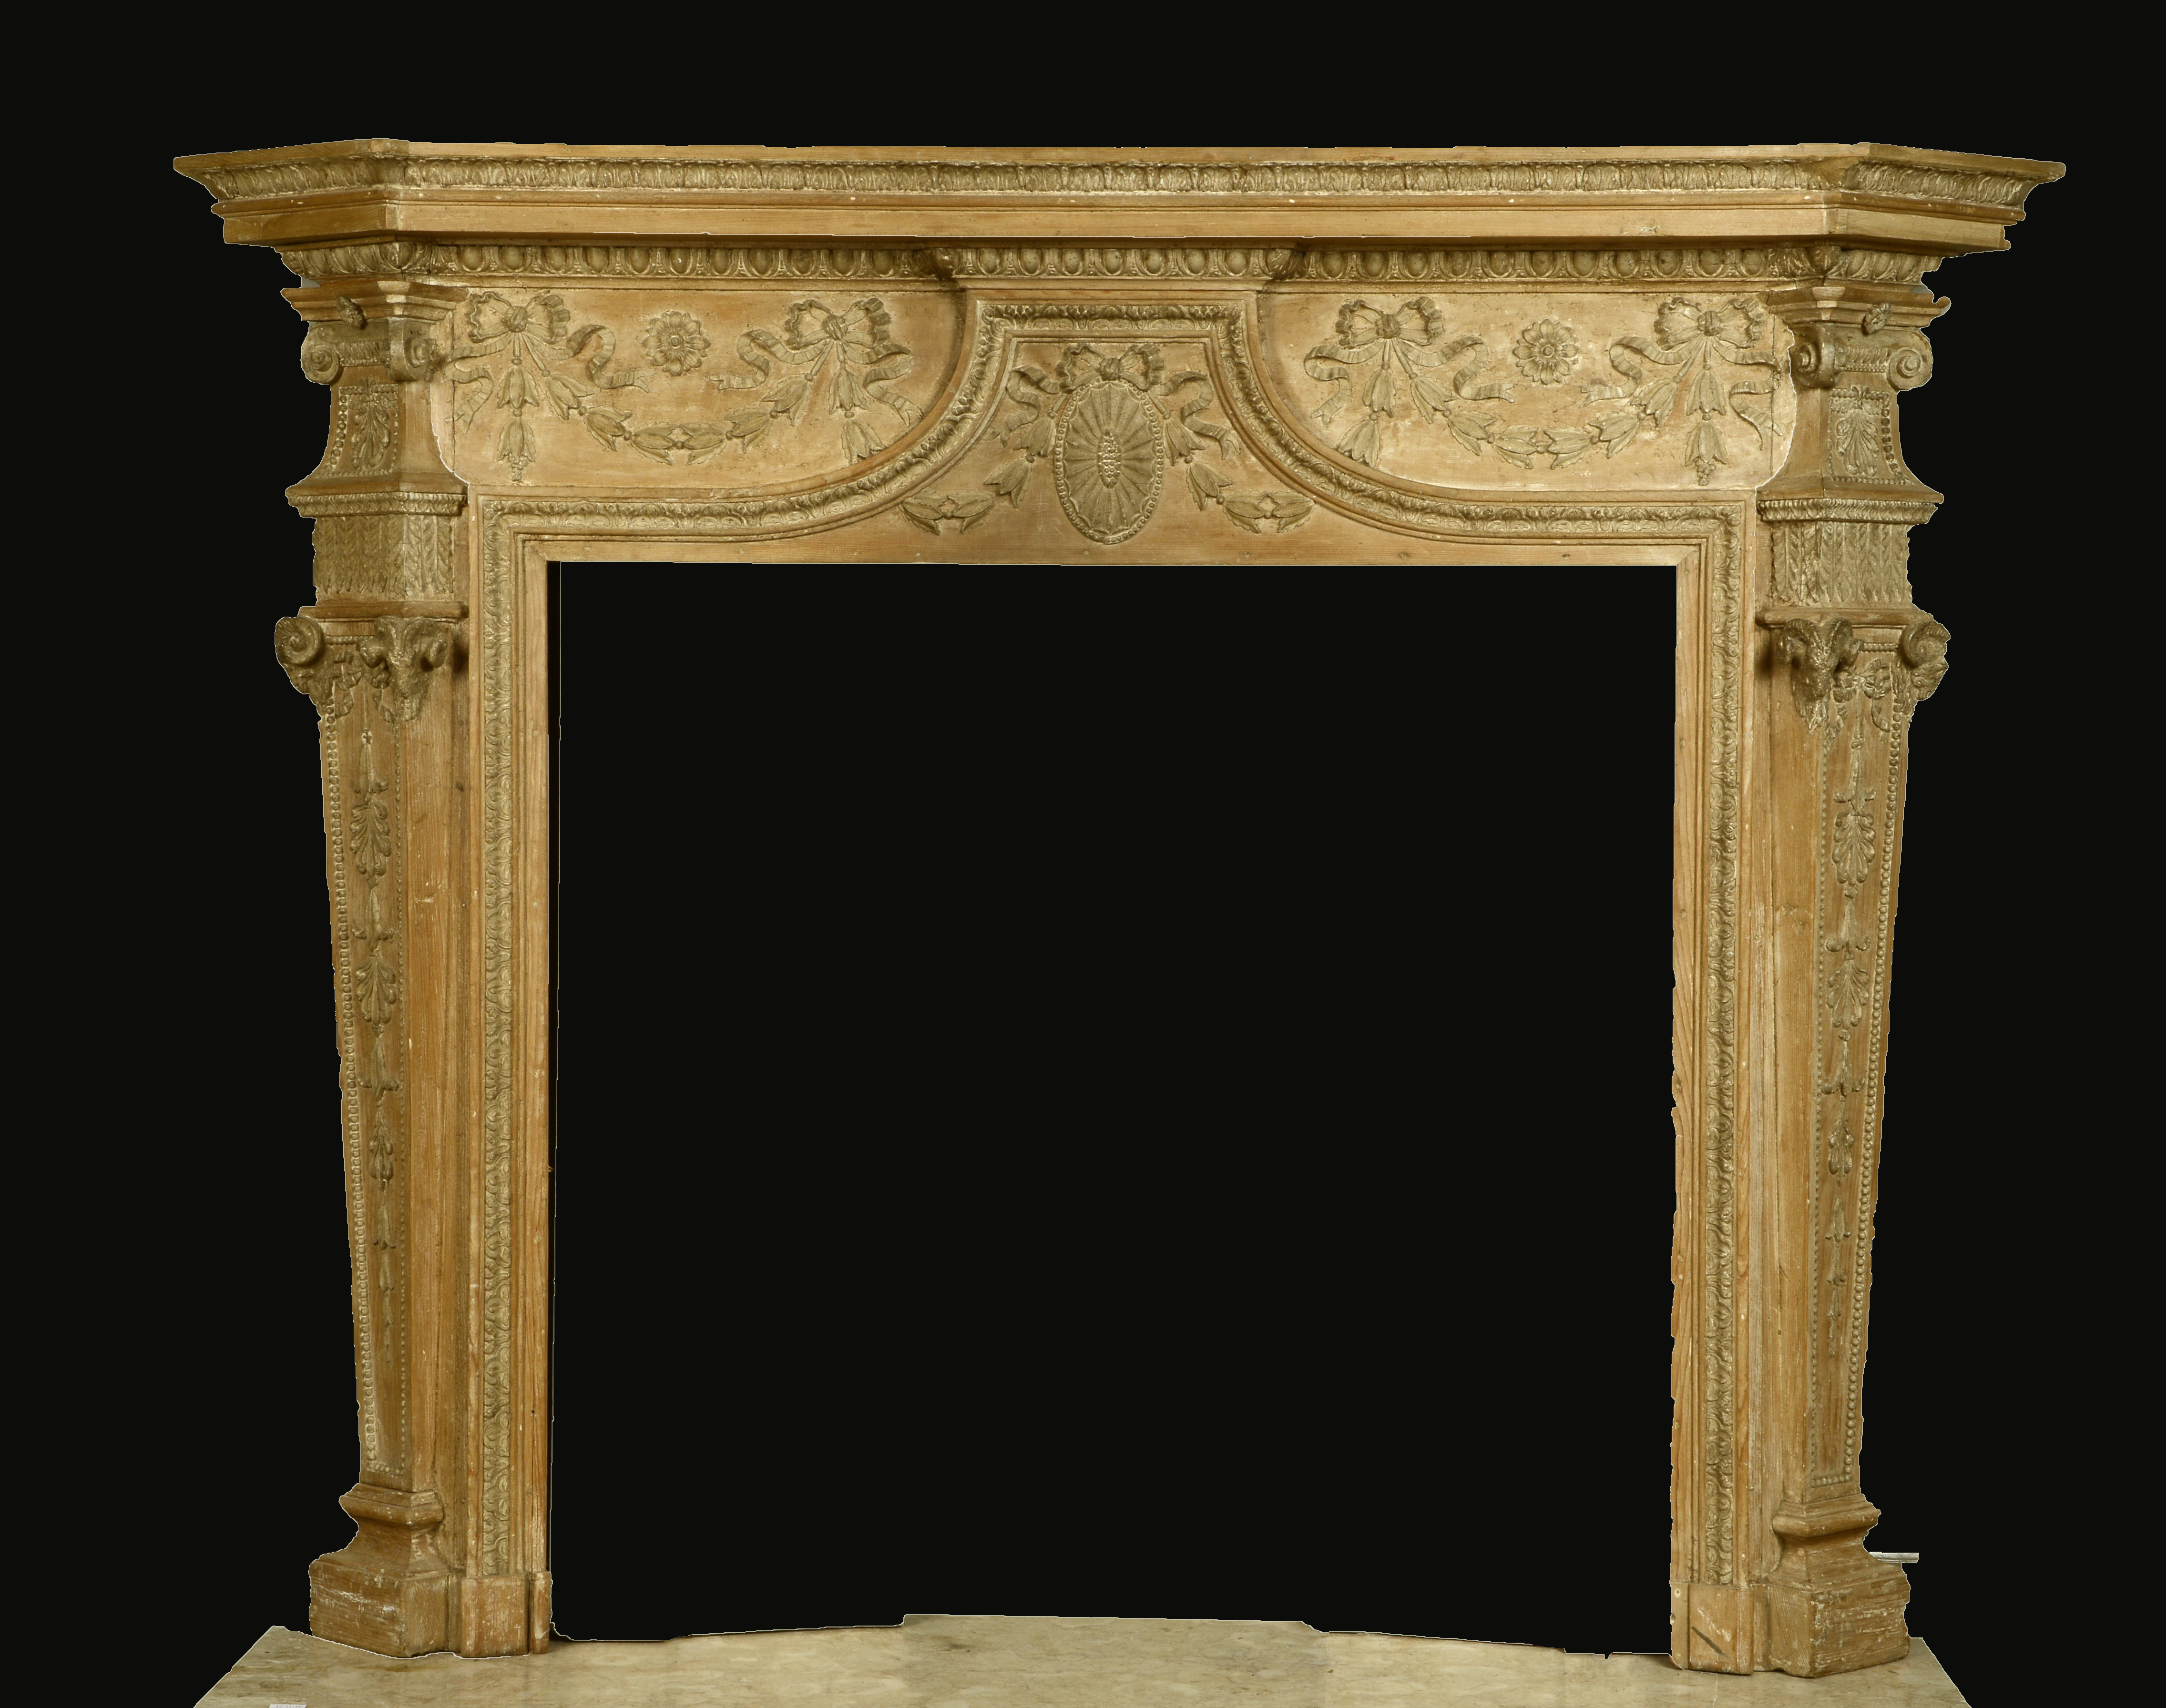 A PINE ADAM STYLE FIRE SURROUND with applied and carved decoration with central oval paterae and